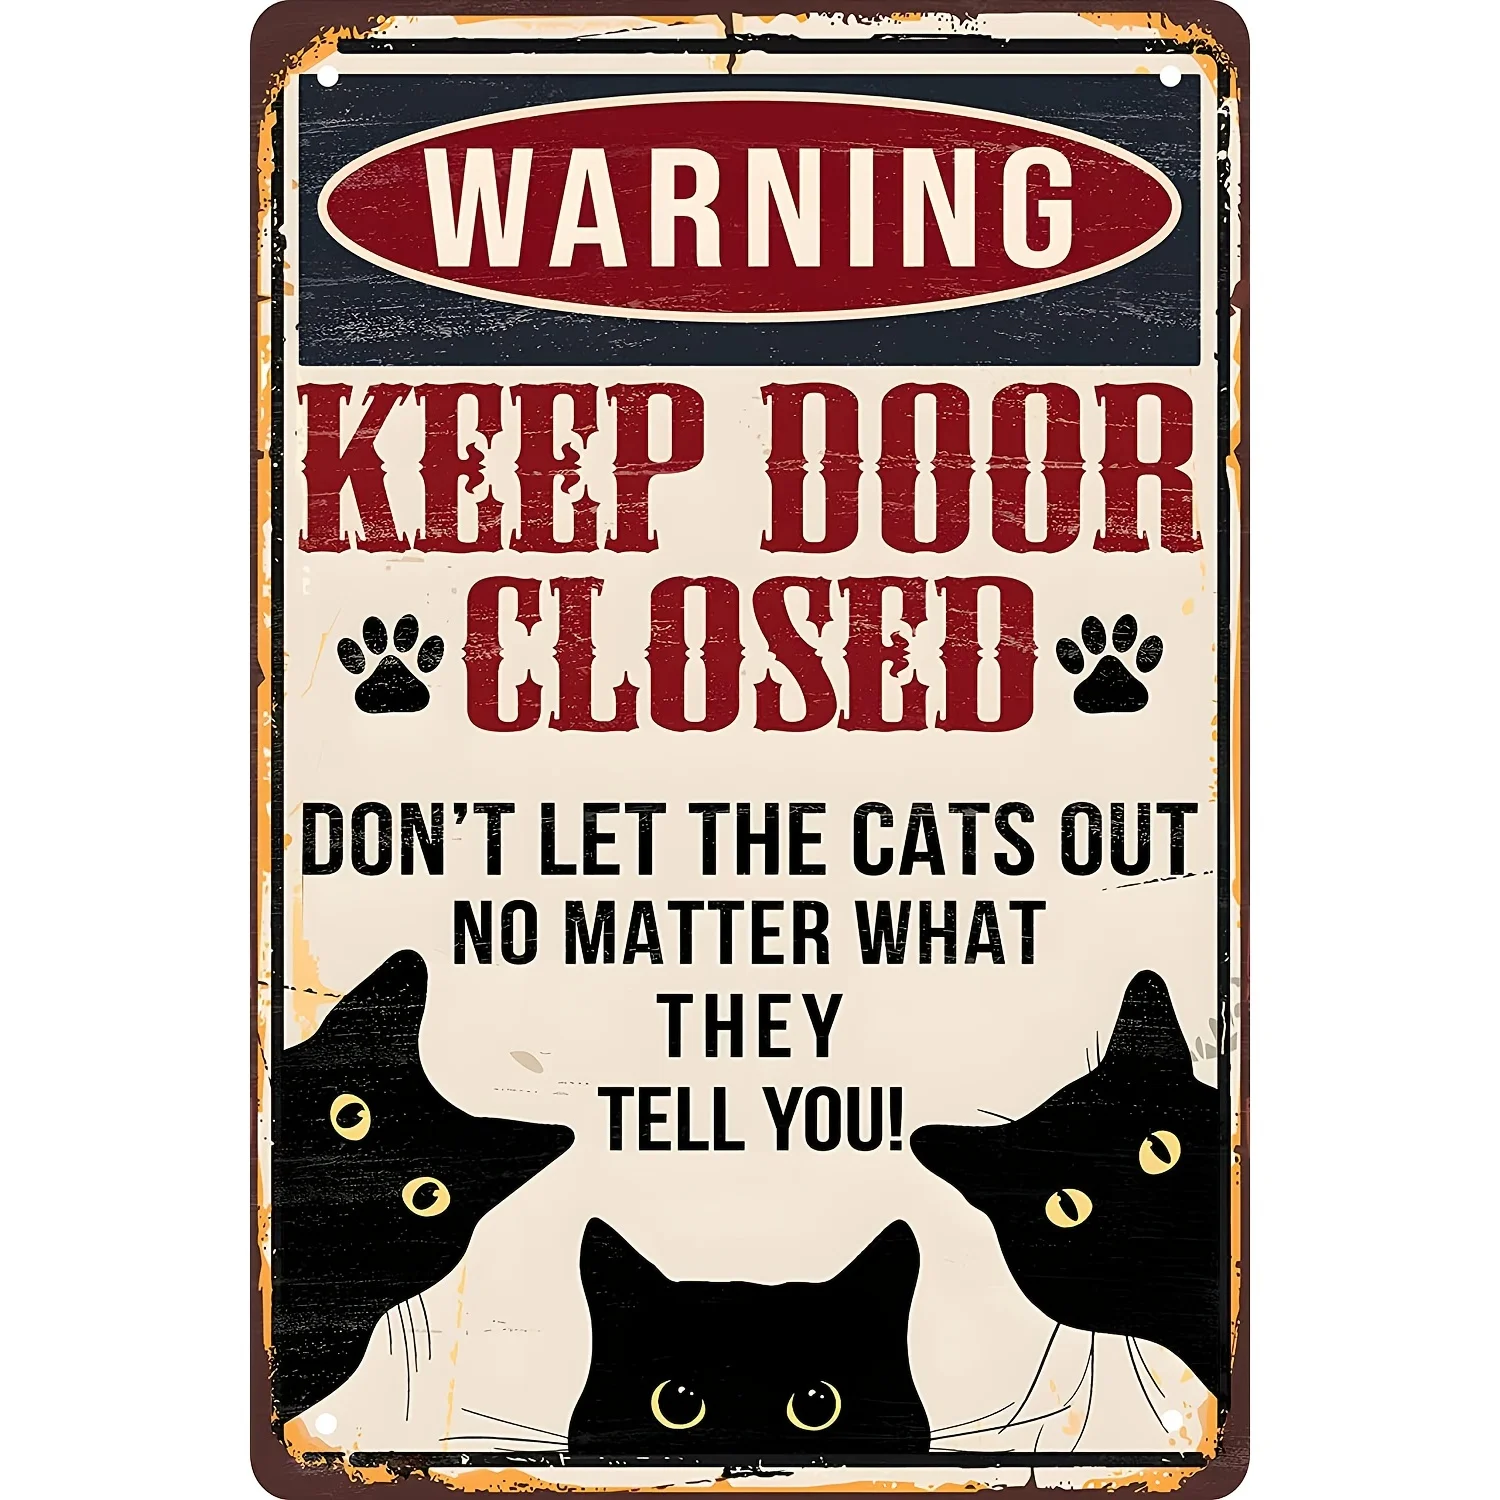 

Funny Black Cat Warning Decor Retro Metal Tin Sign - Keep Door Closed Don't Let The Cats Out No Matter What They Tell You